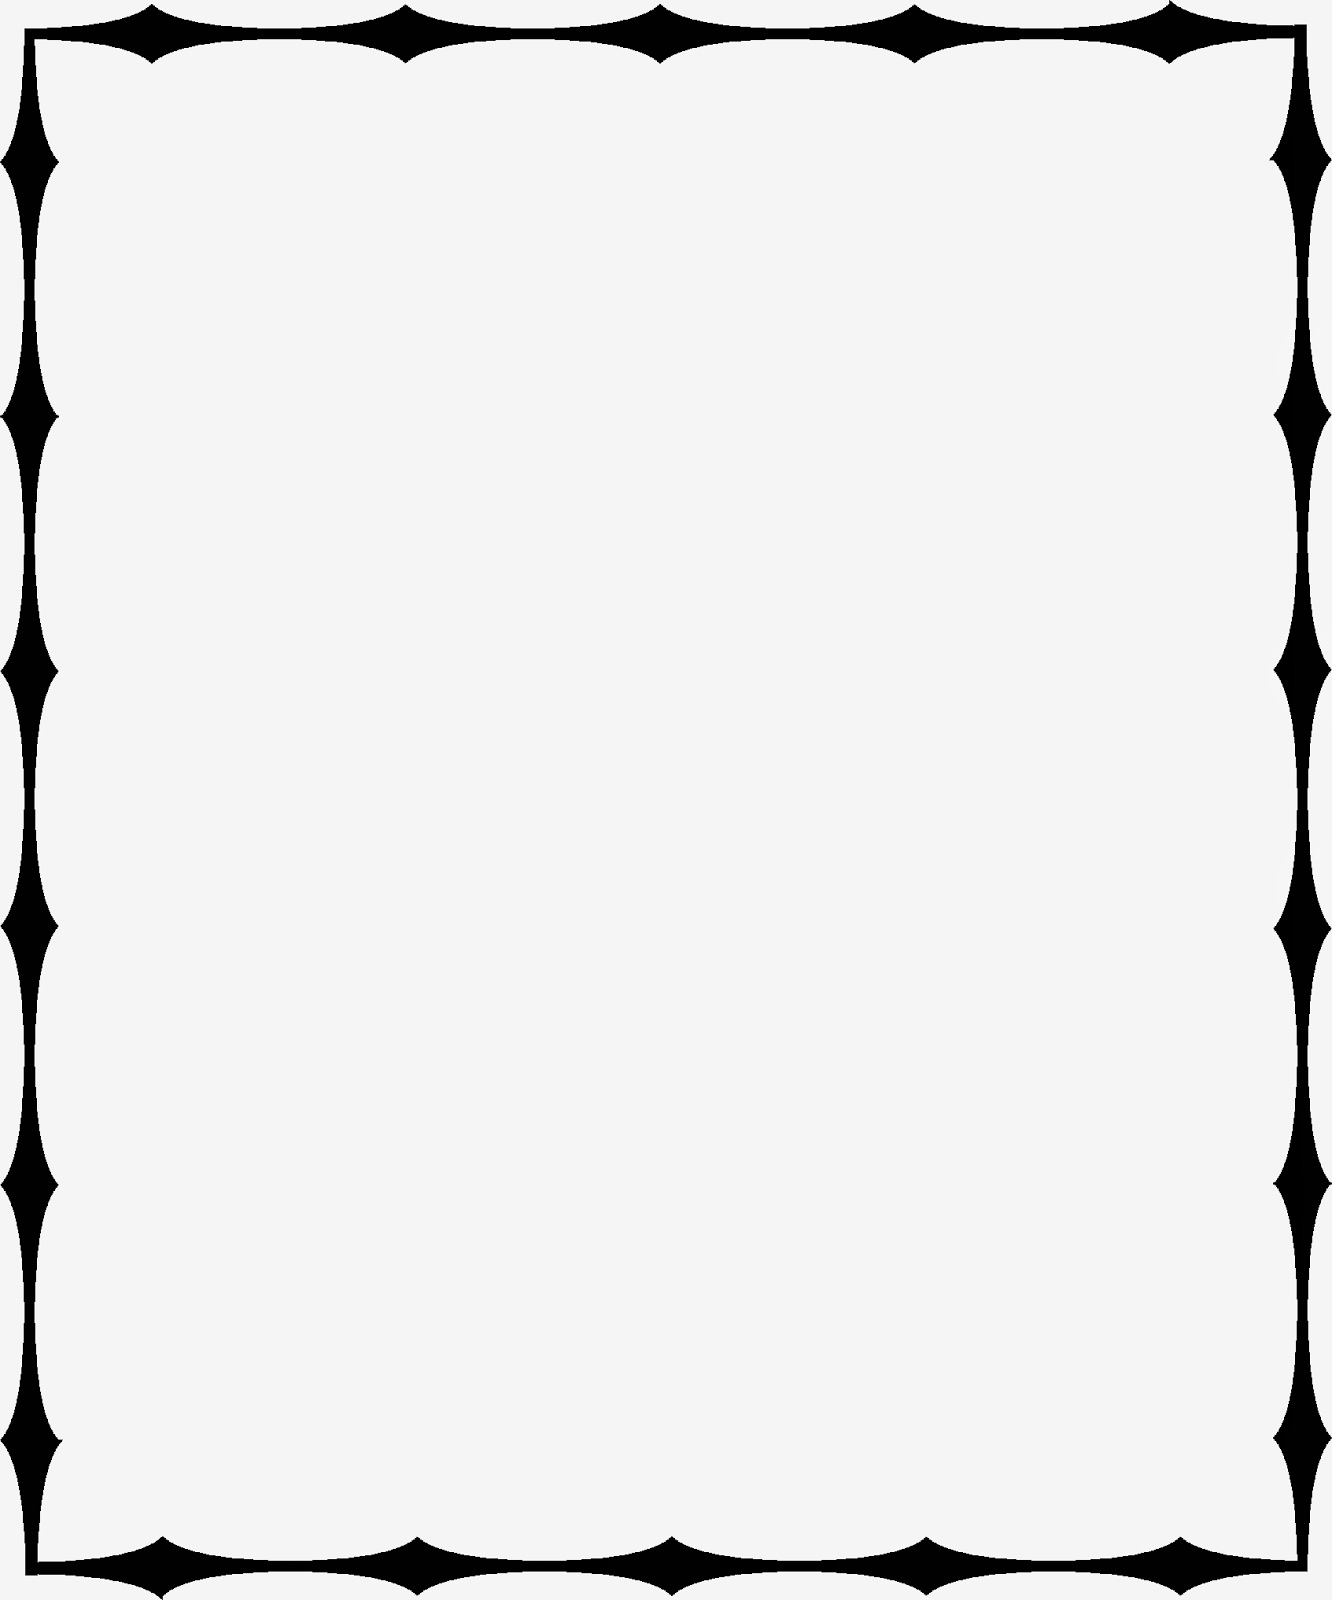 Indian Page Borders - Viewing - Free Clipart Images